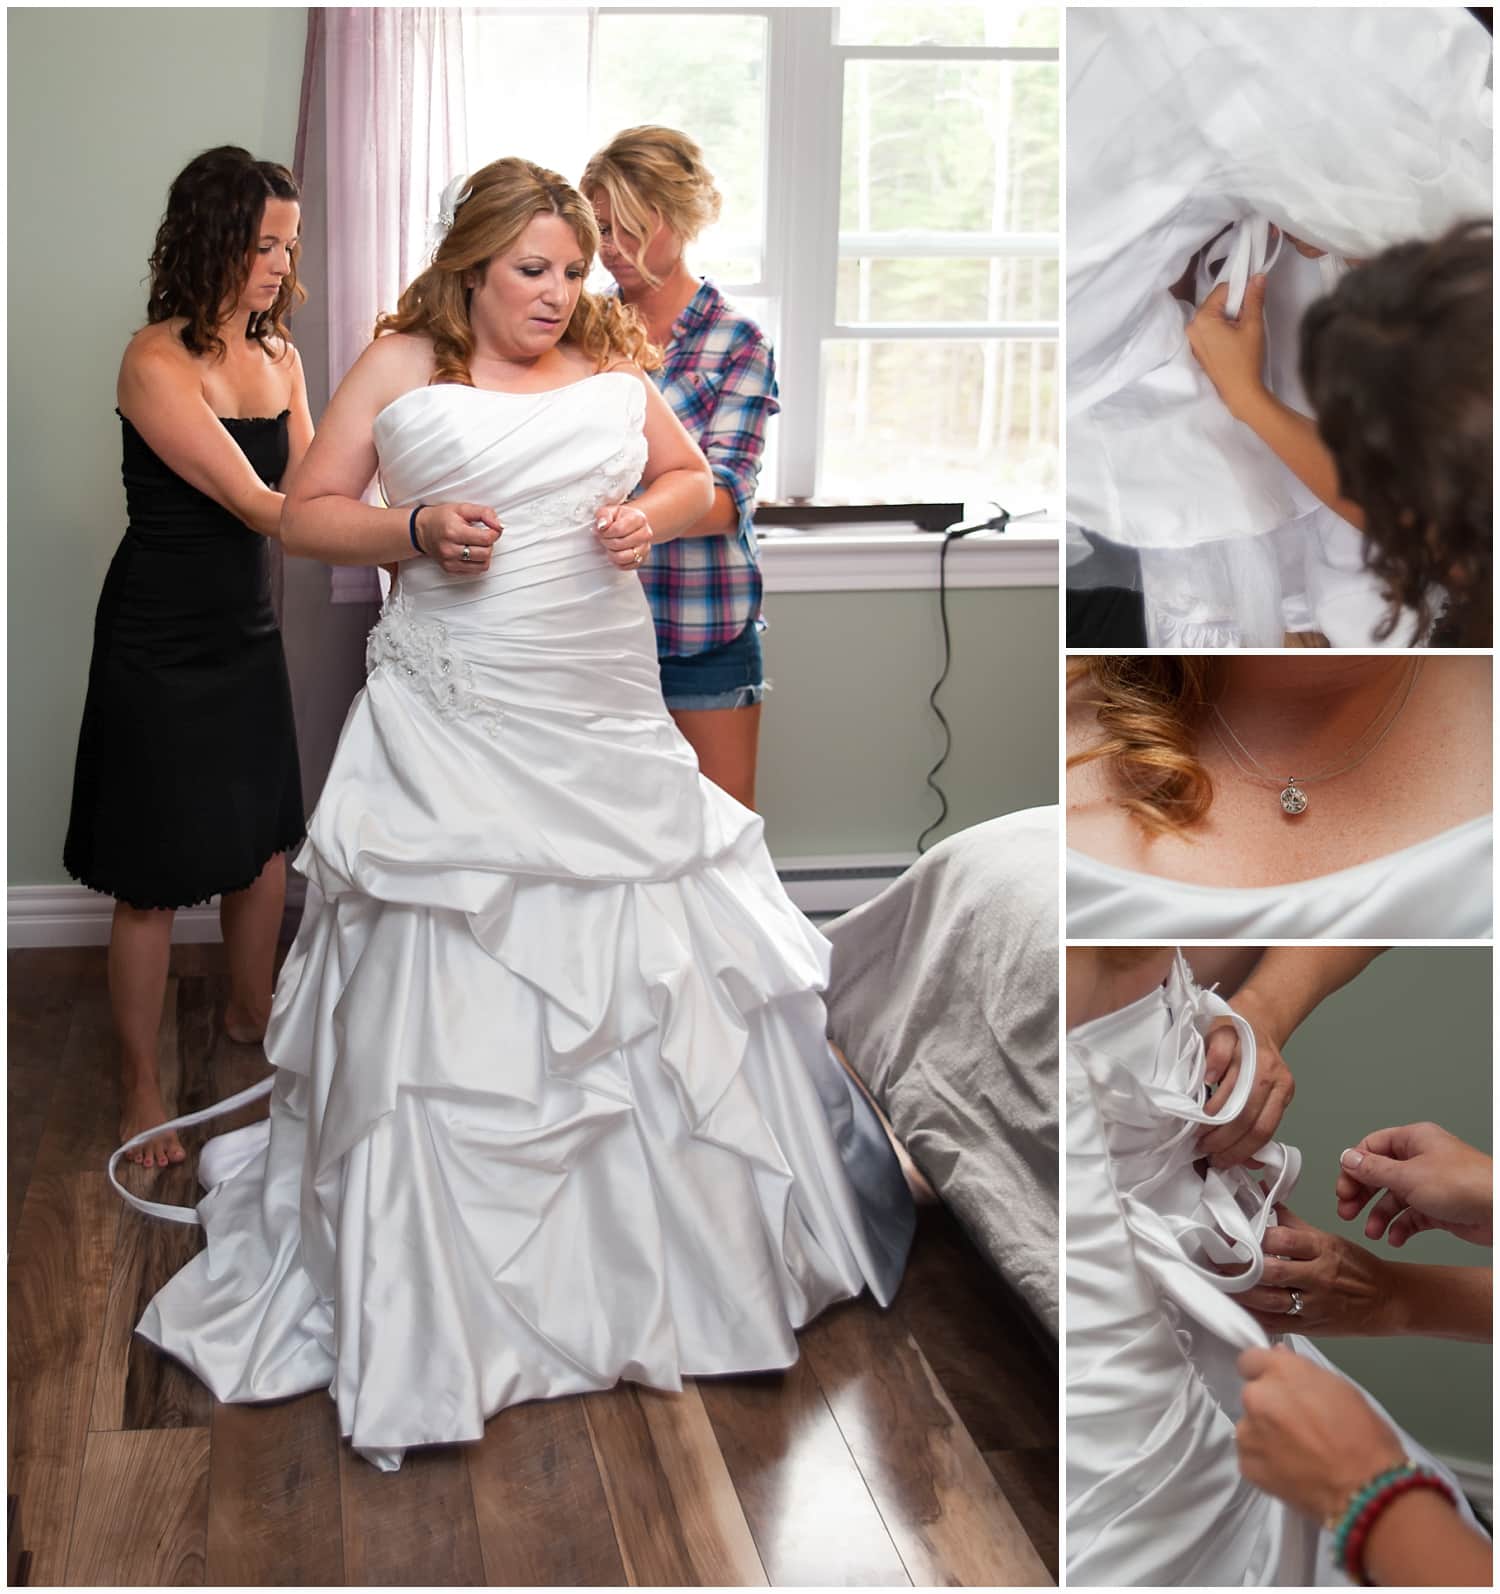 The bride getting ready during bridal prep for her Halifax NS wedding.